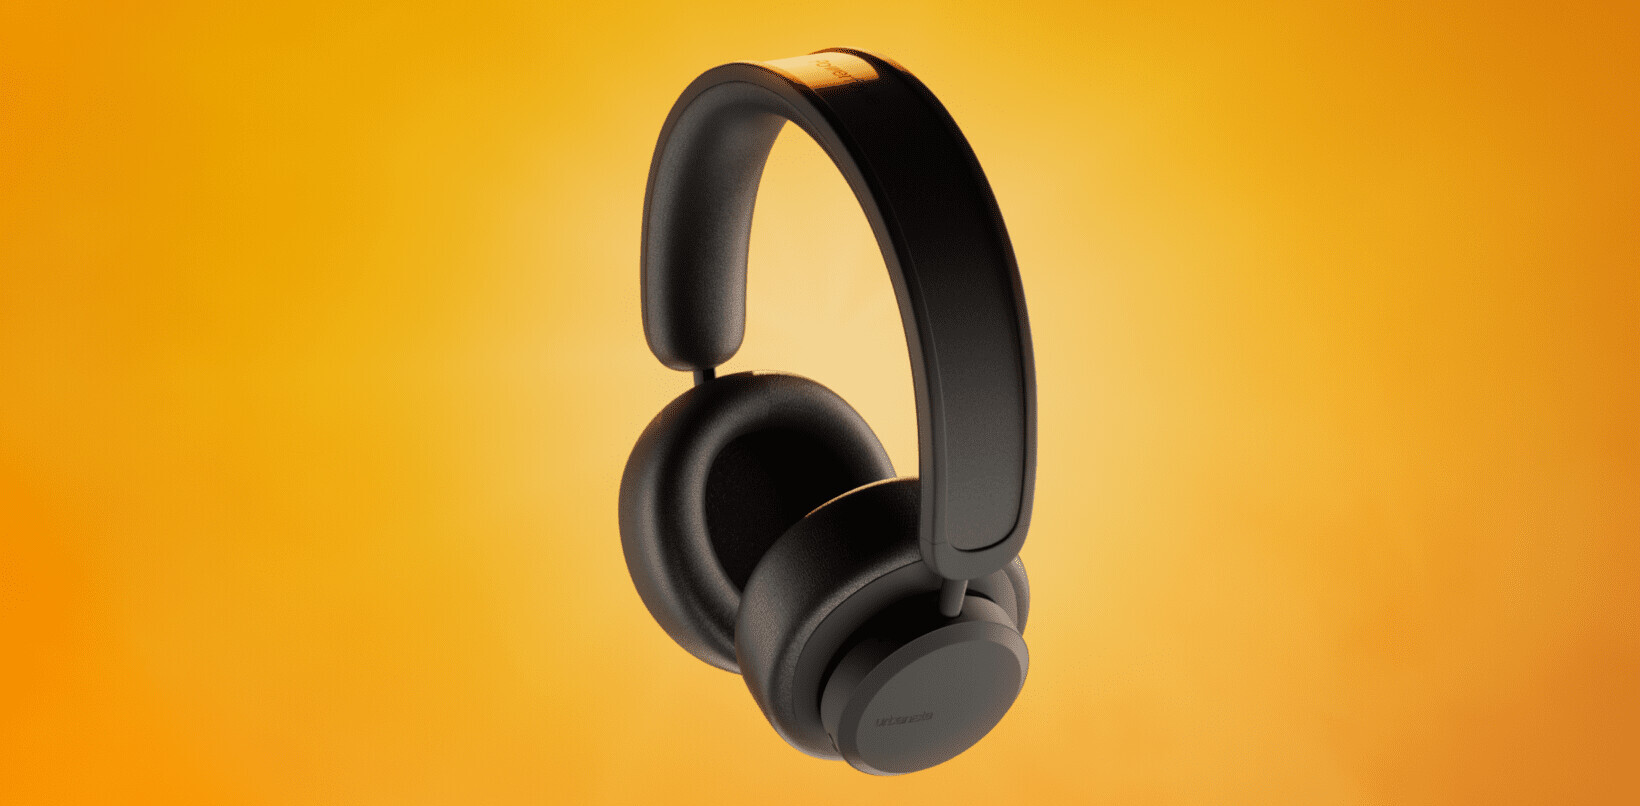 Urbanista’s solar-powered ANC headphones never have to be charged